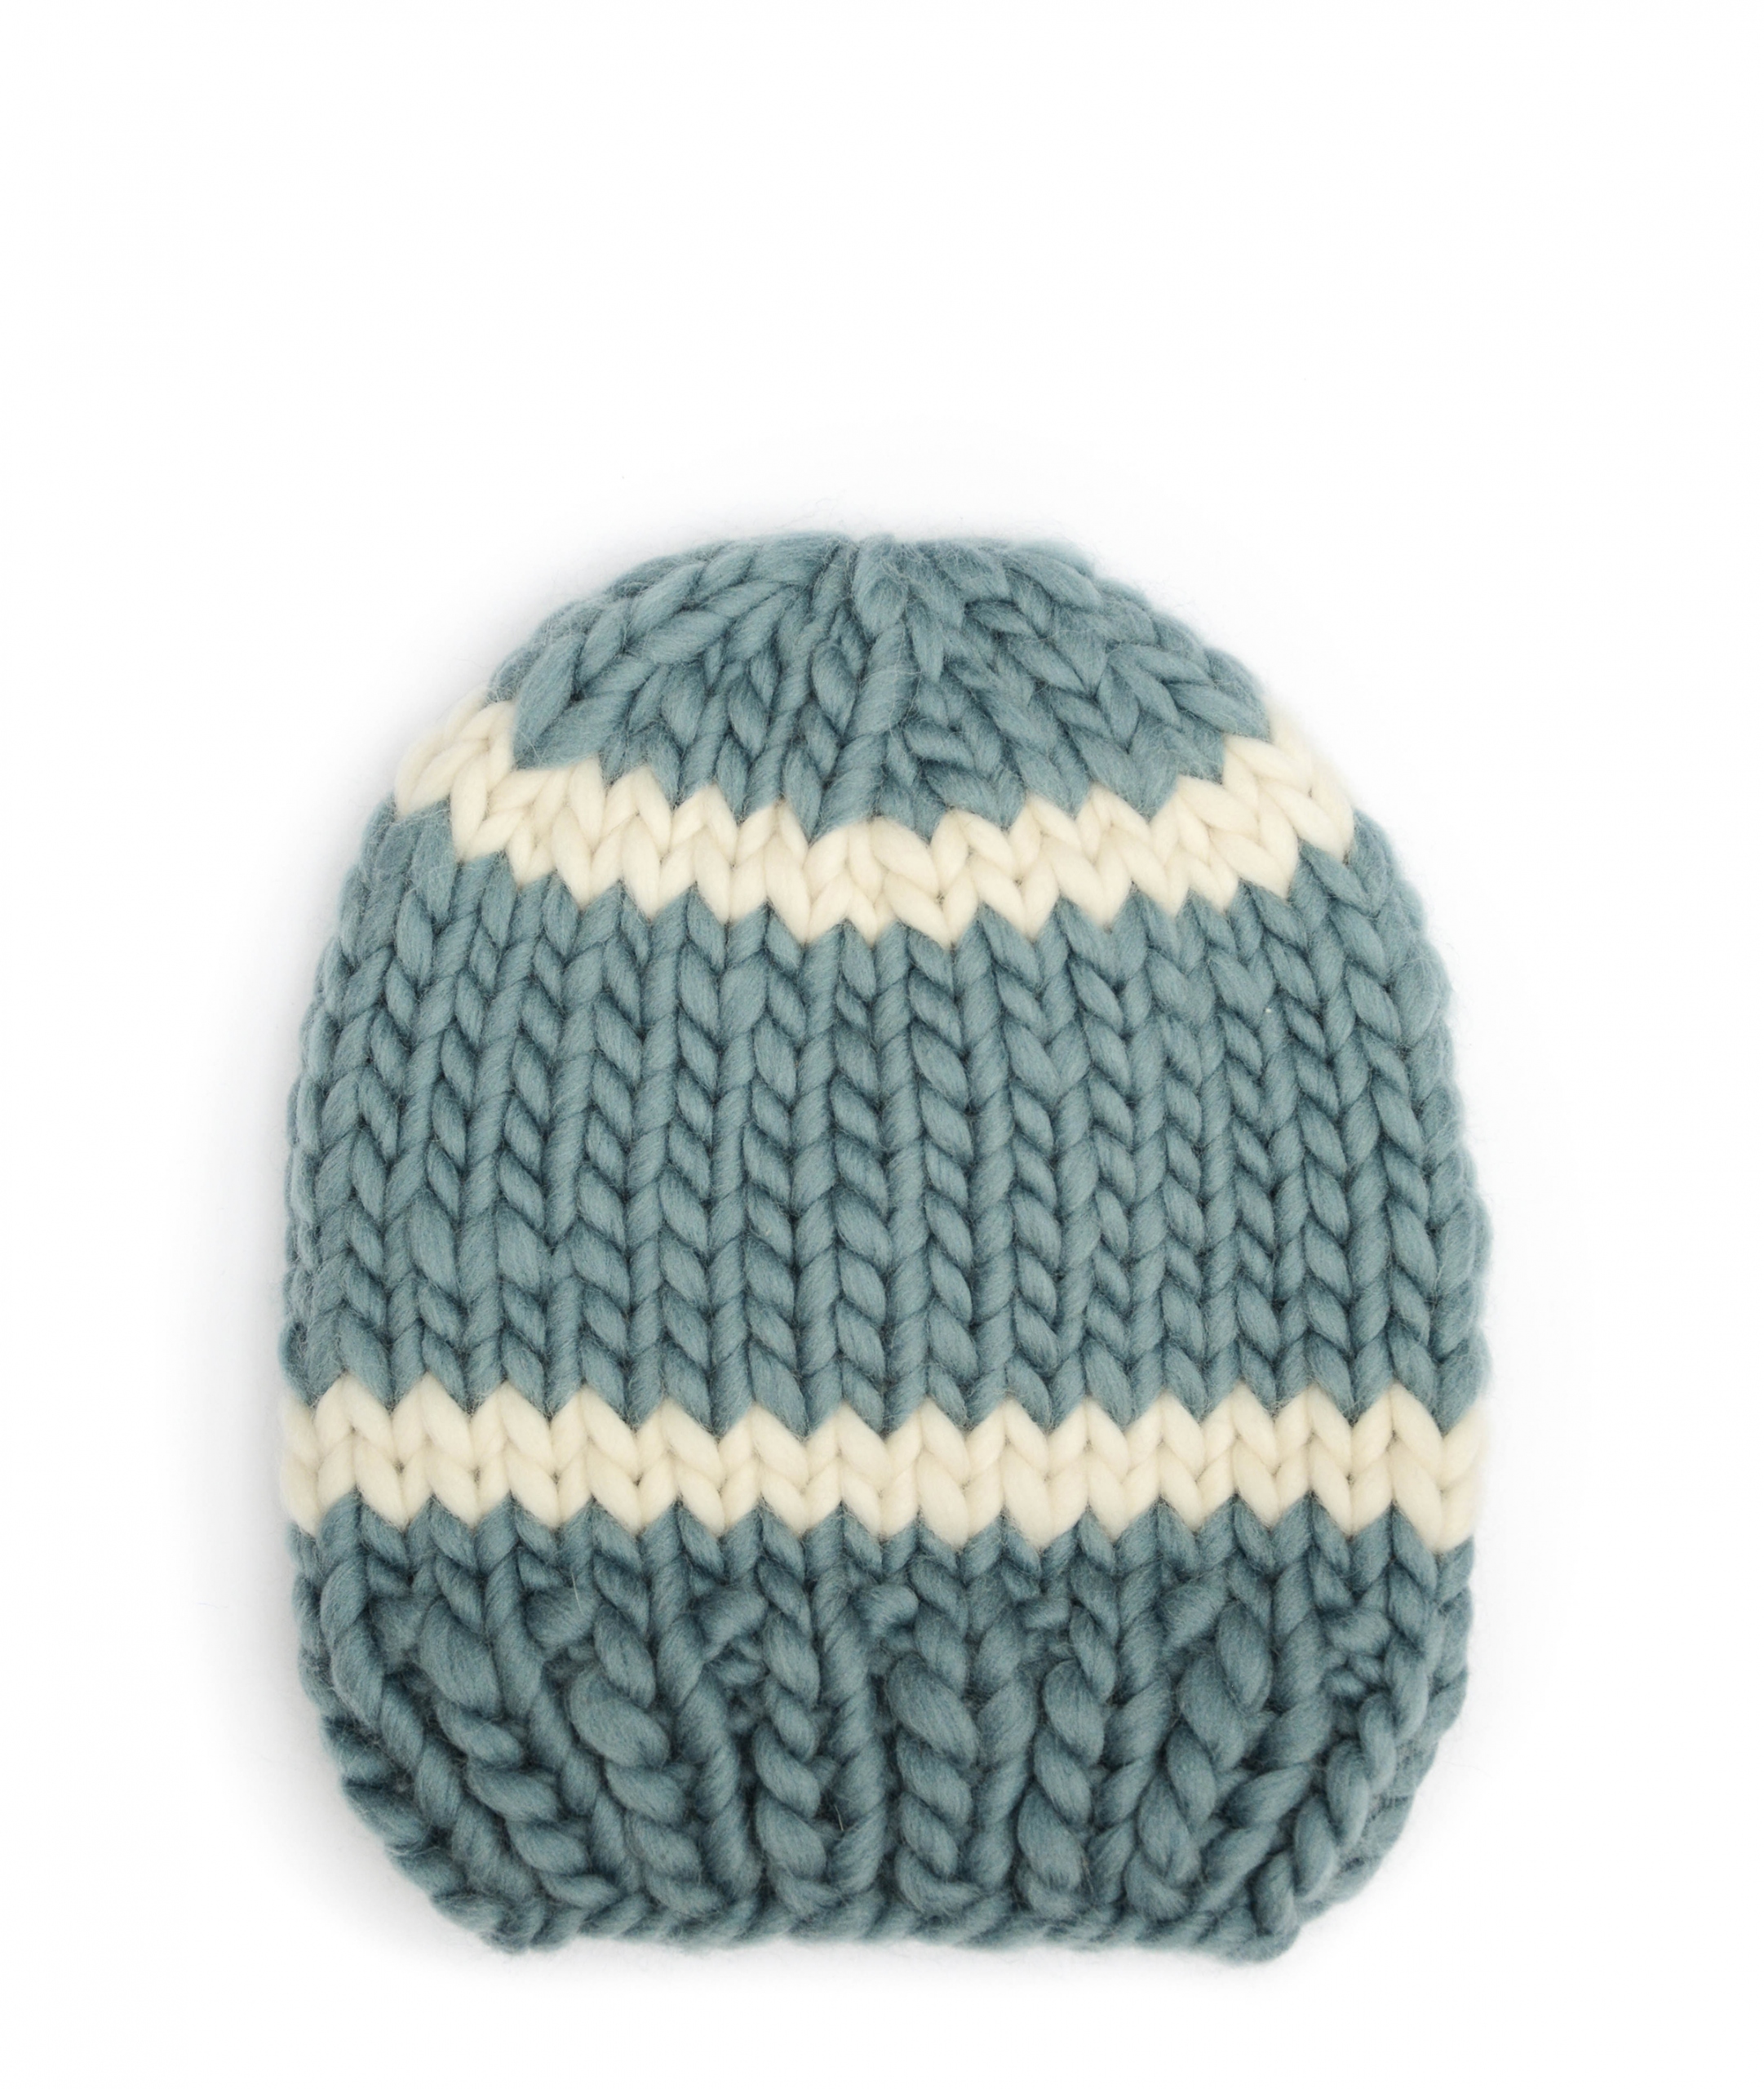 Handmade wool hats - Stone and Ivory striped beanie. Click to customise.